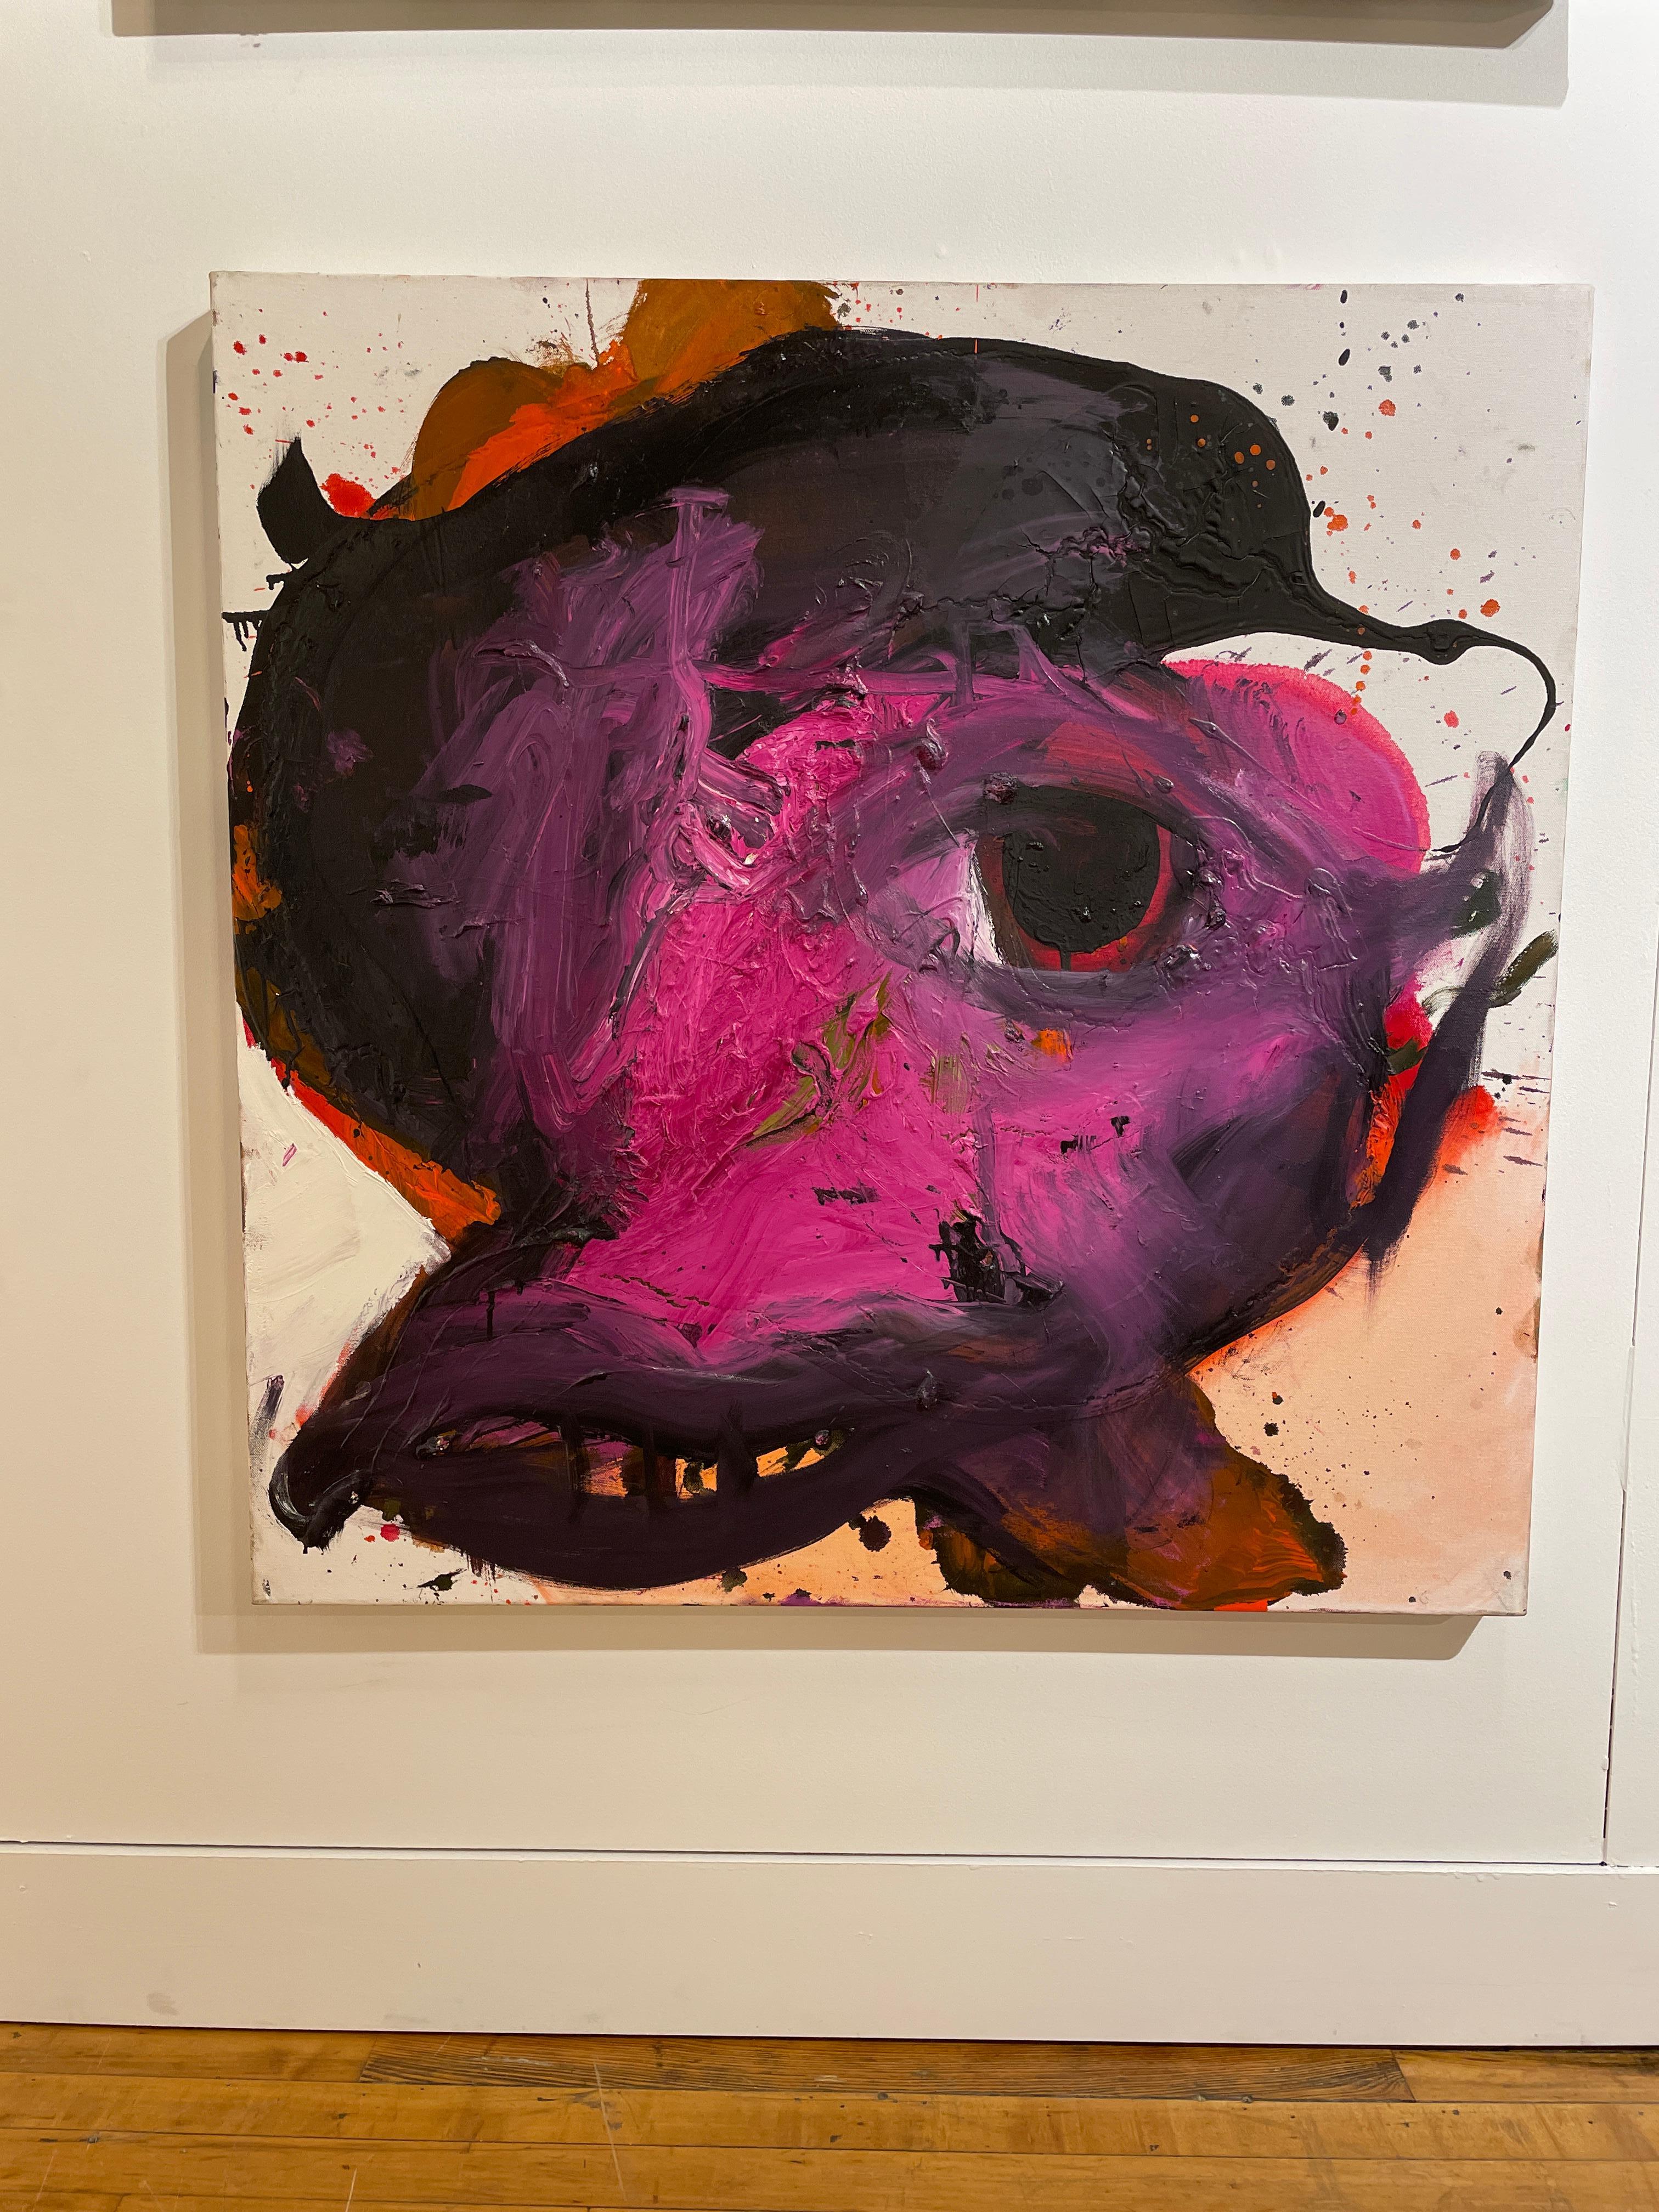  The Pink Musketeer, Black Abstract Figure with Bright Fuchsia, Red, and Orange - Painting by Wesley Kimler